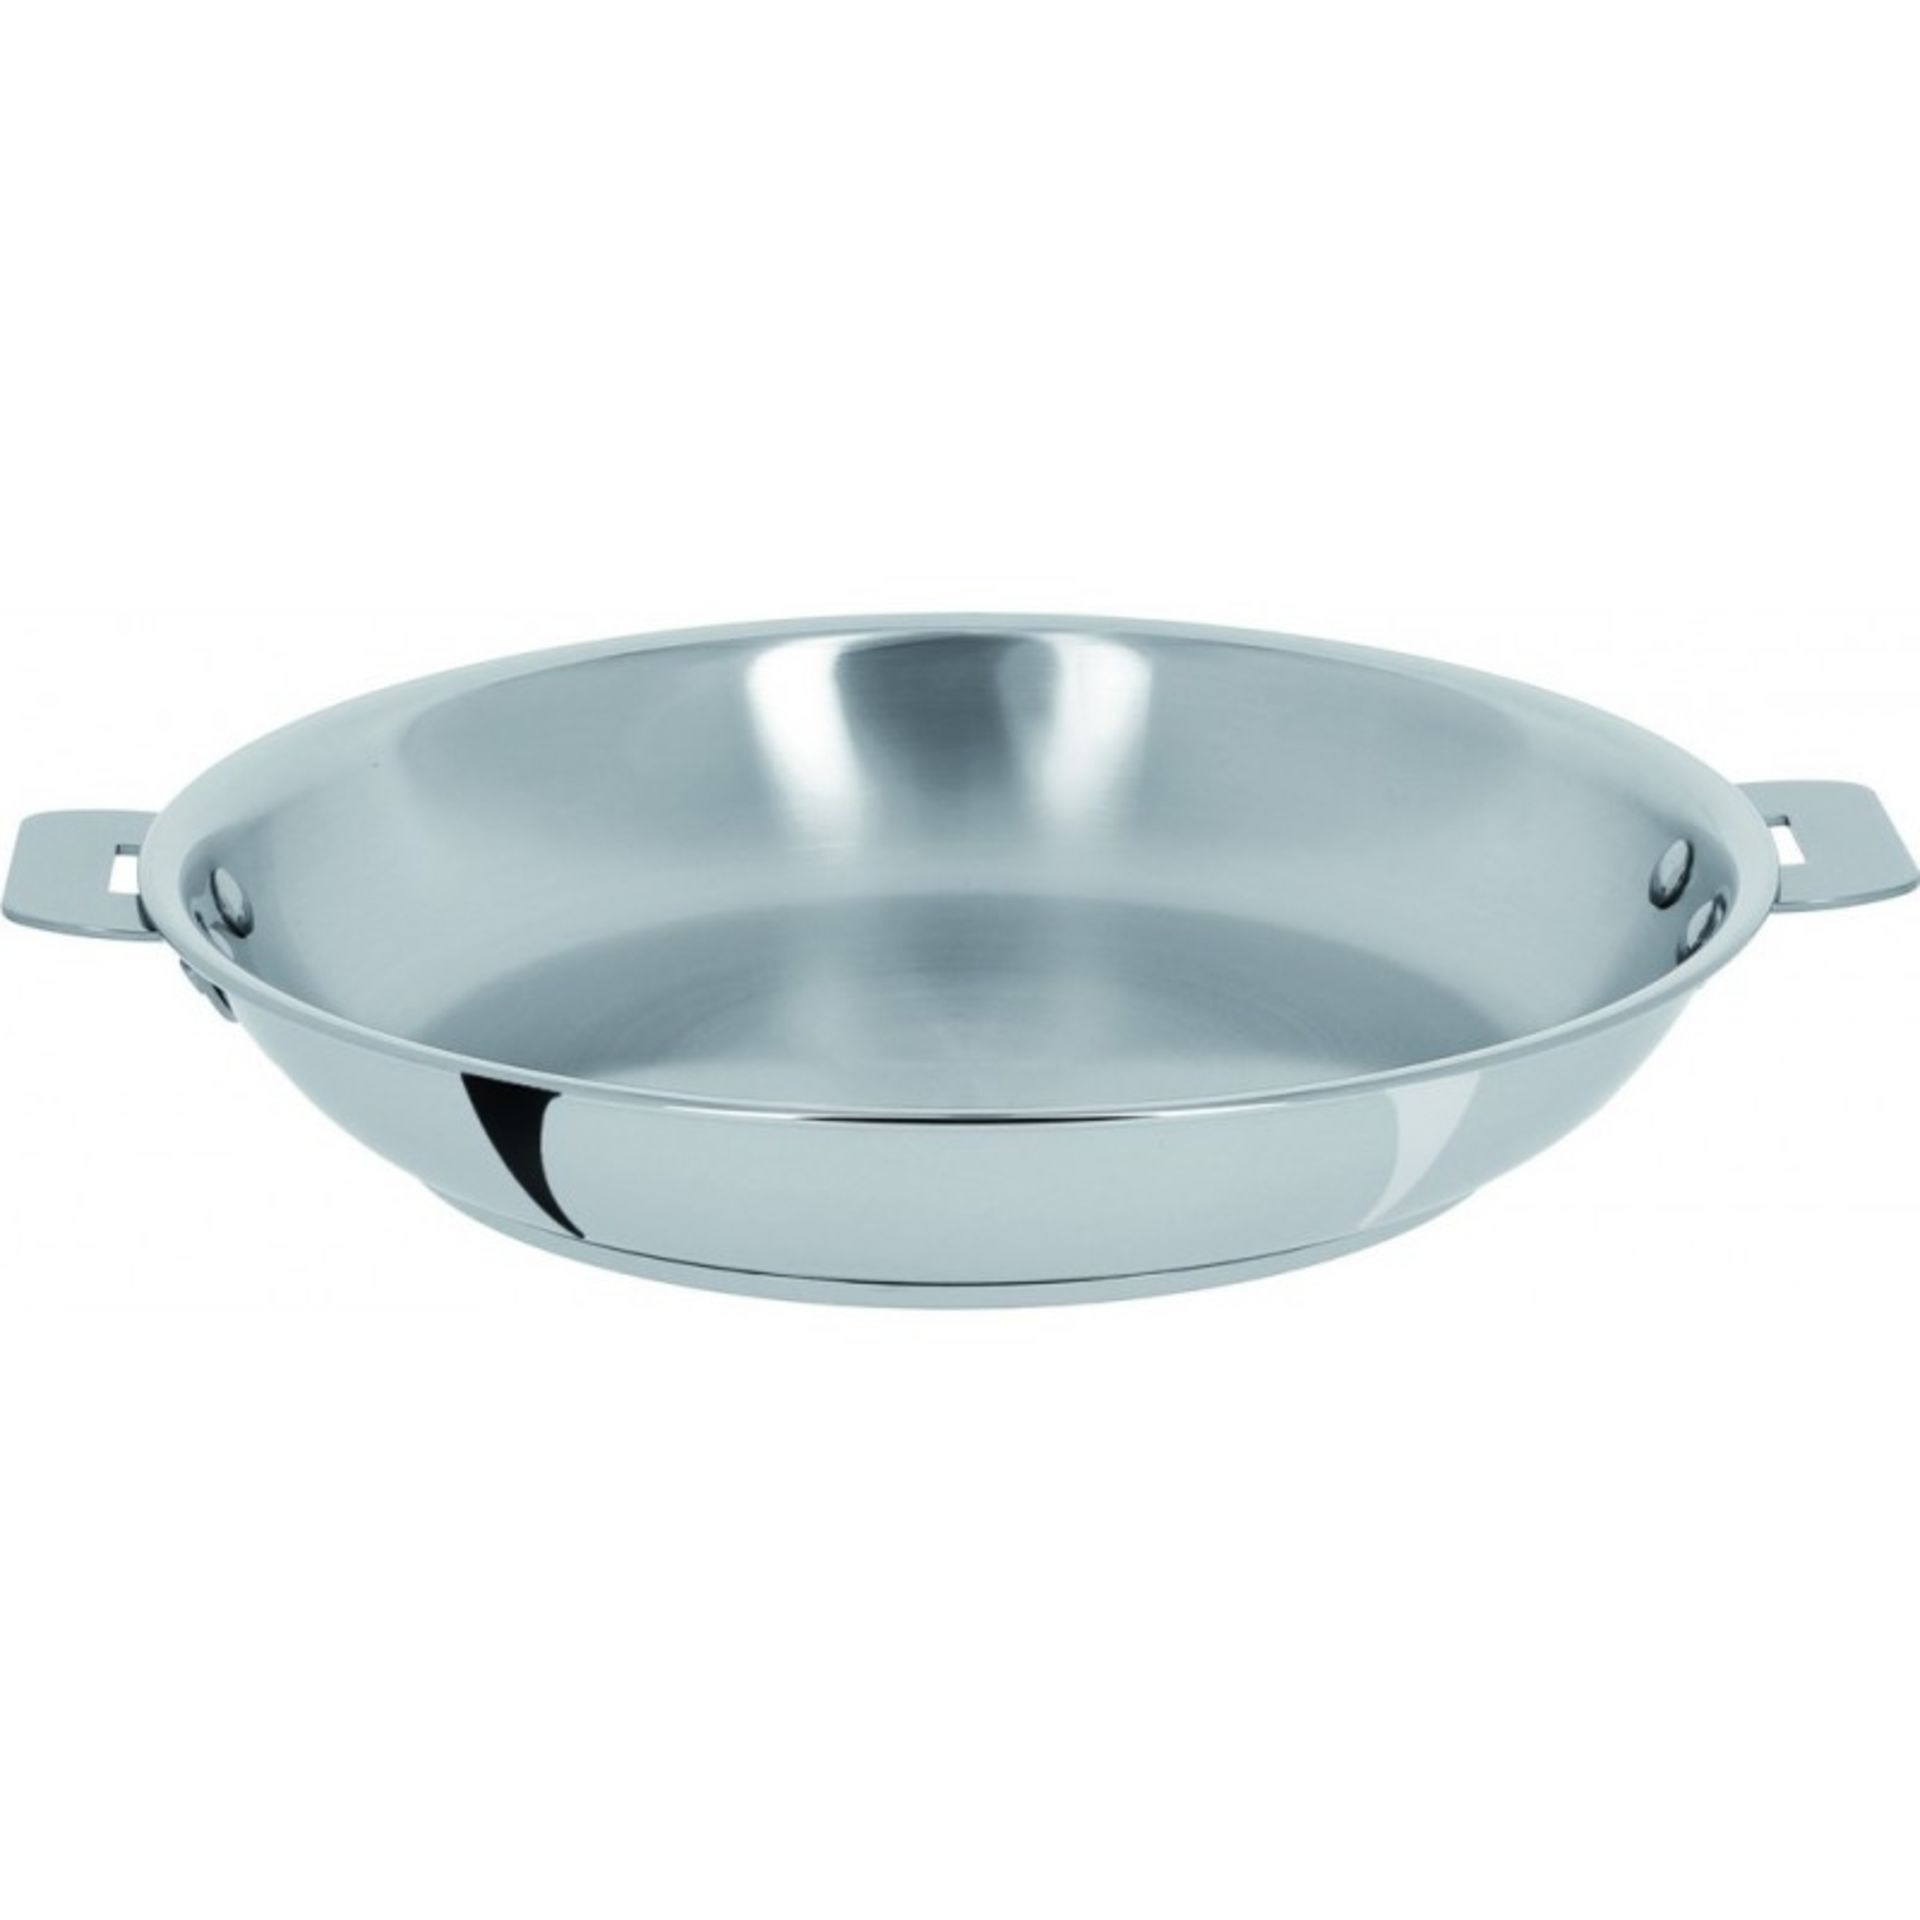 Cristel Pan Stainless Steal RRP £119.99